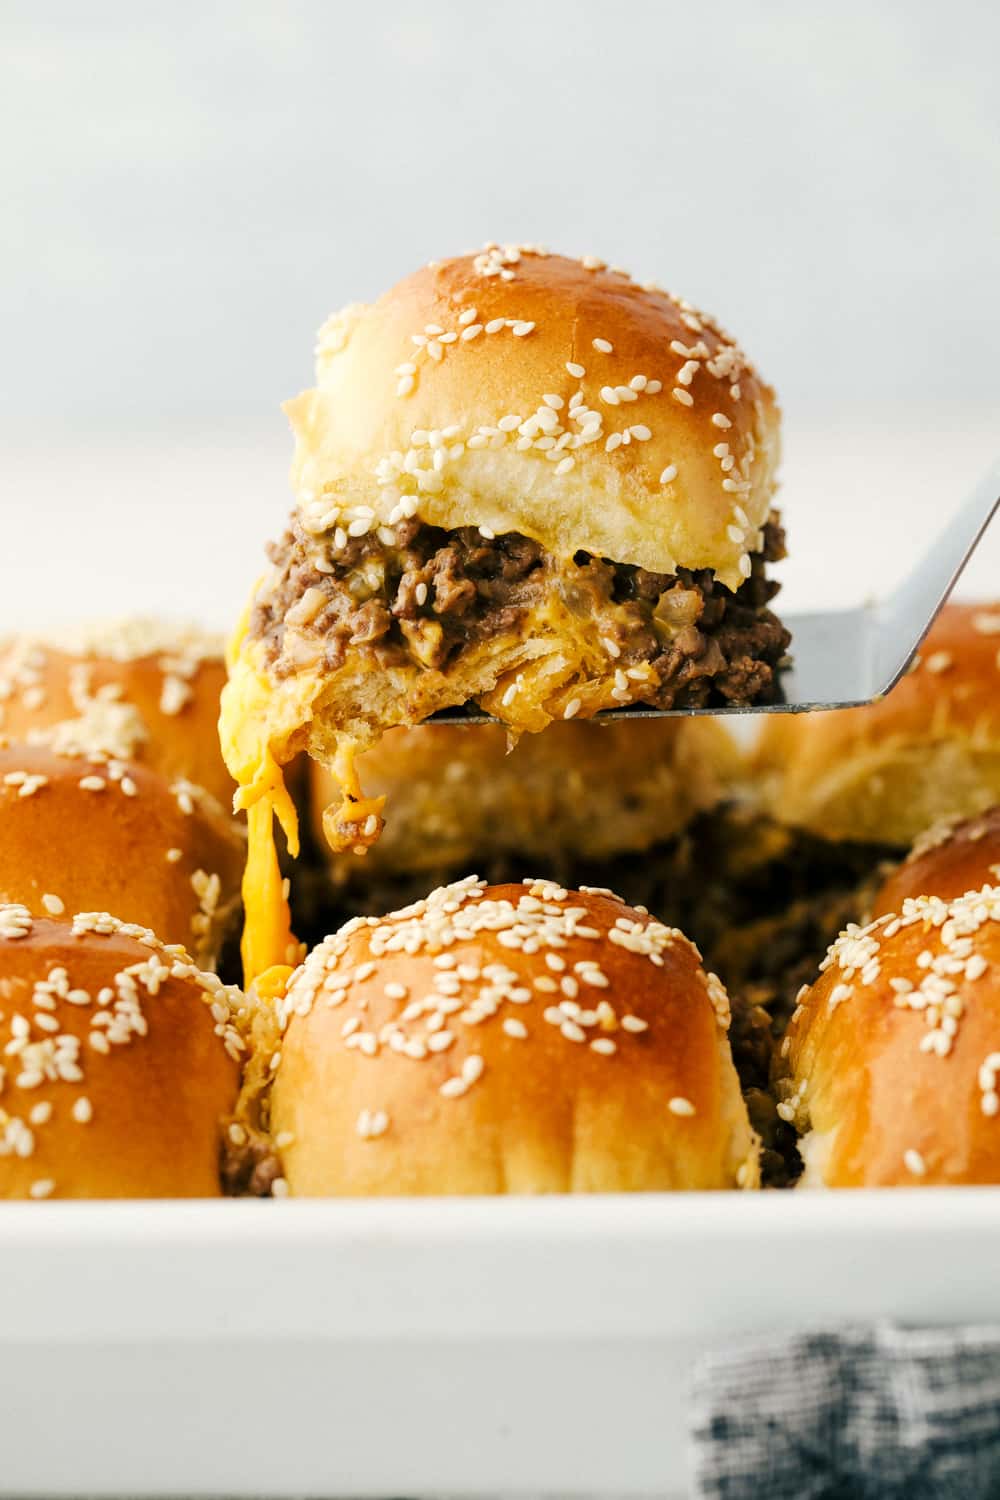 Lift the cheeseburger slider from the pan!